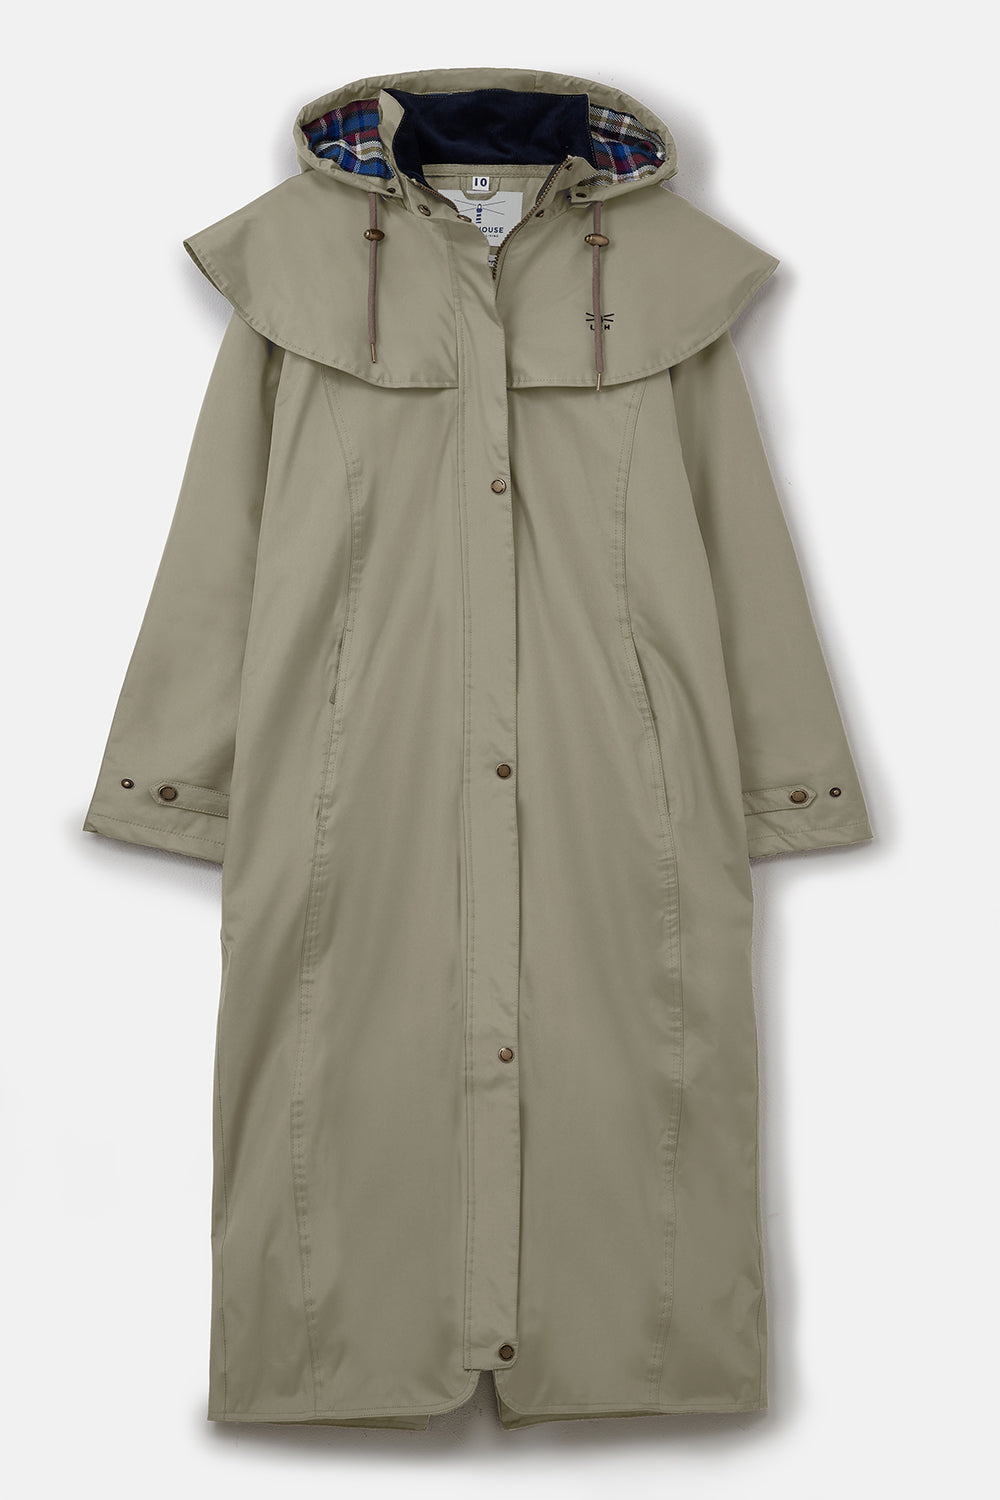 Lighthouse Outback Womens Waterproof Coat - Fawn